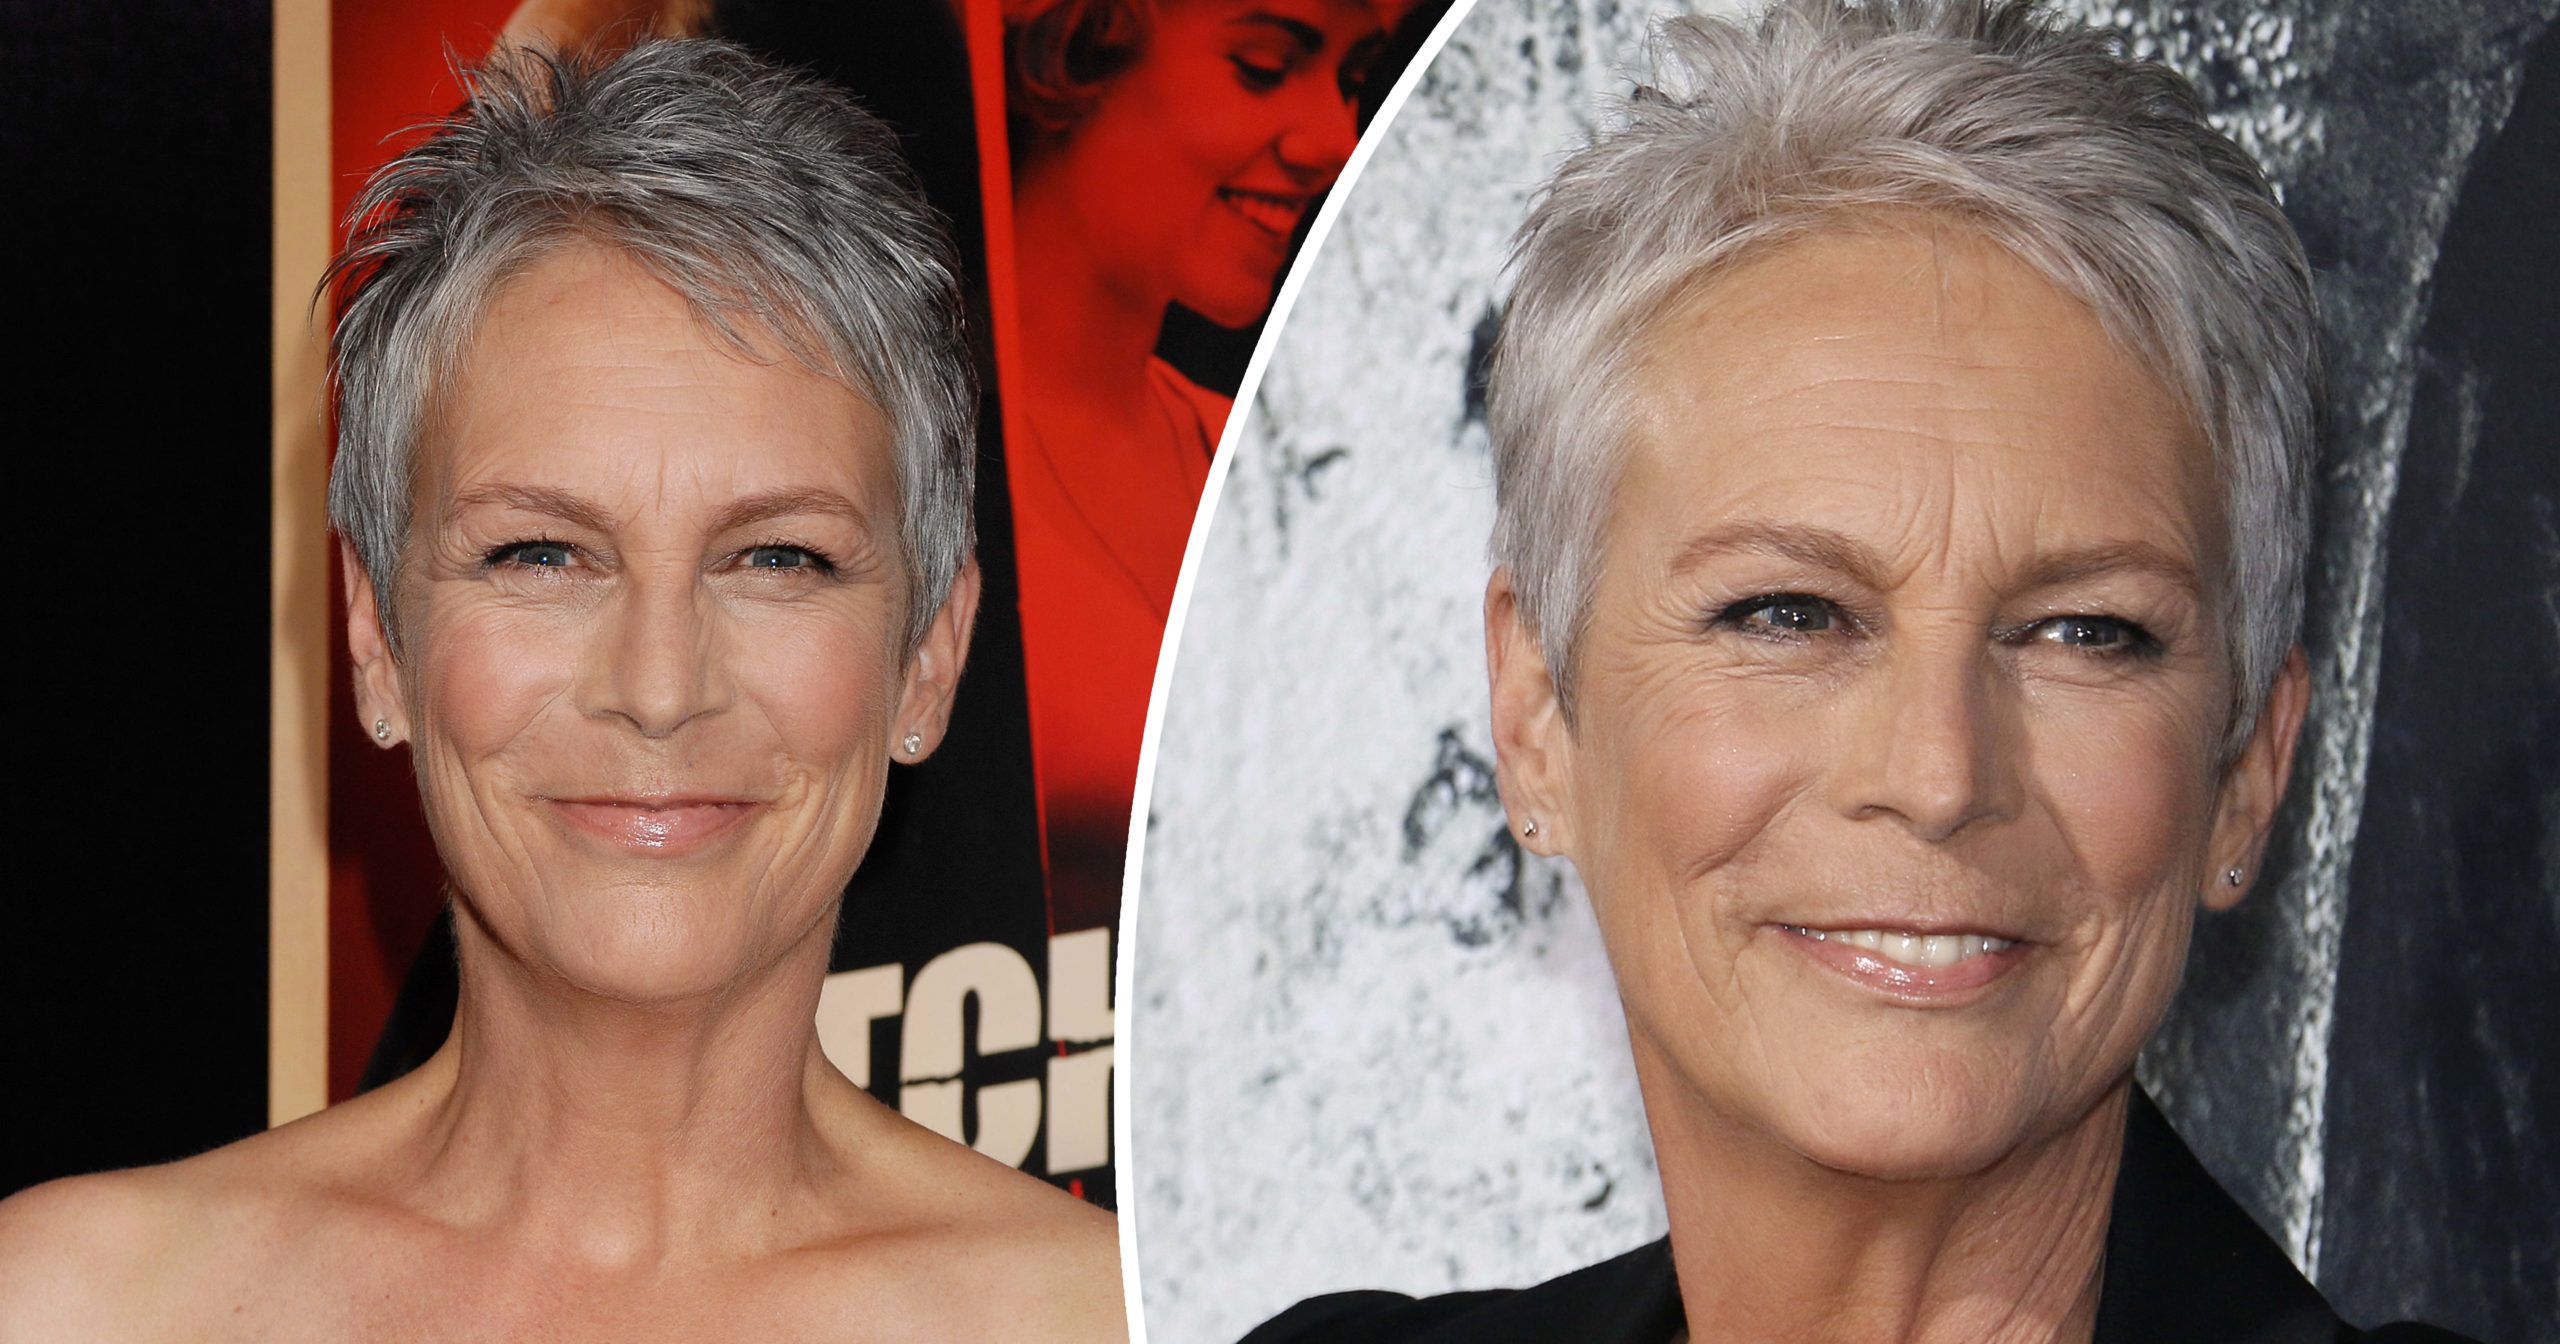 Jamie Lee Curtis reveals plastic surgery mistakes, says it was 